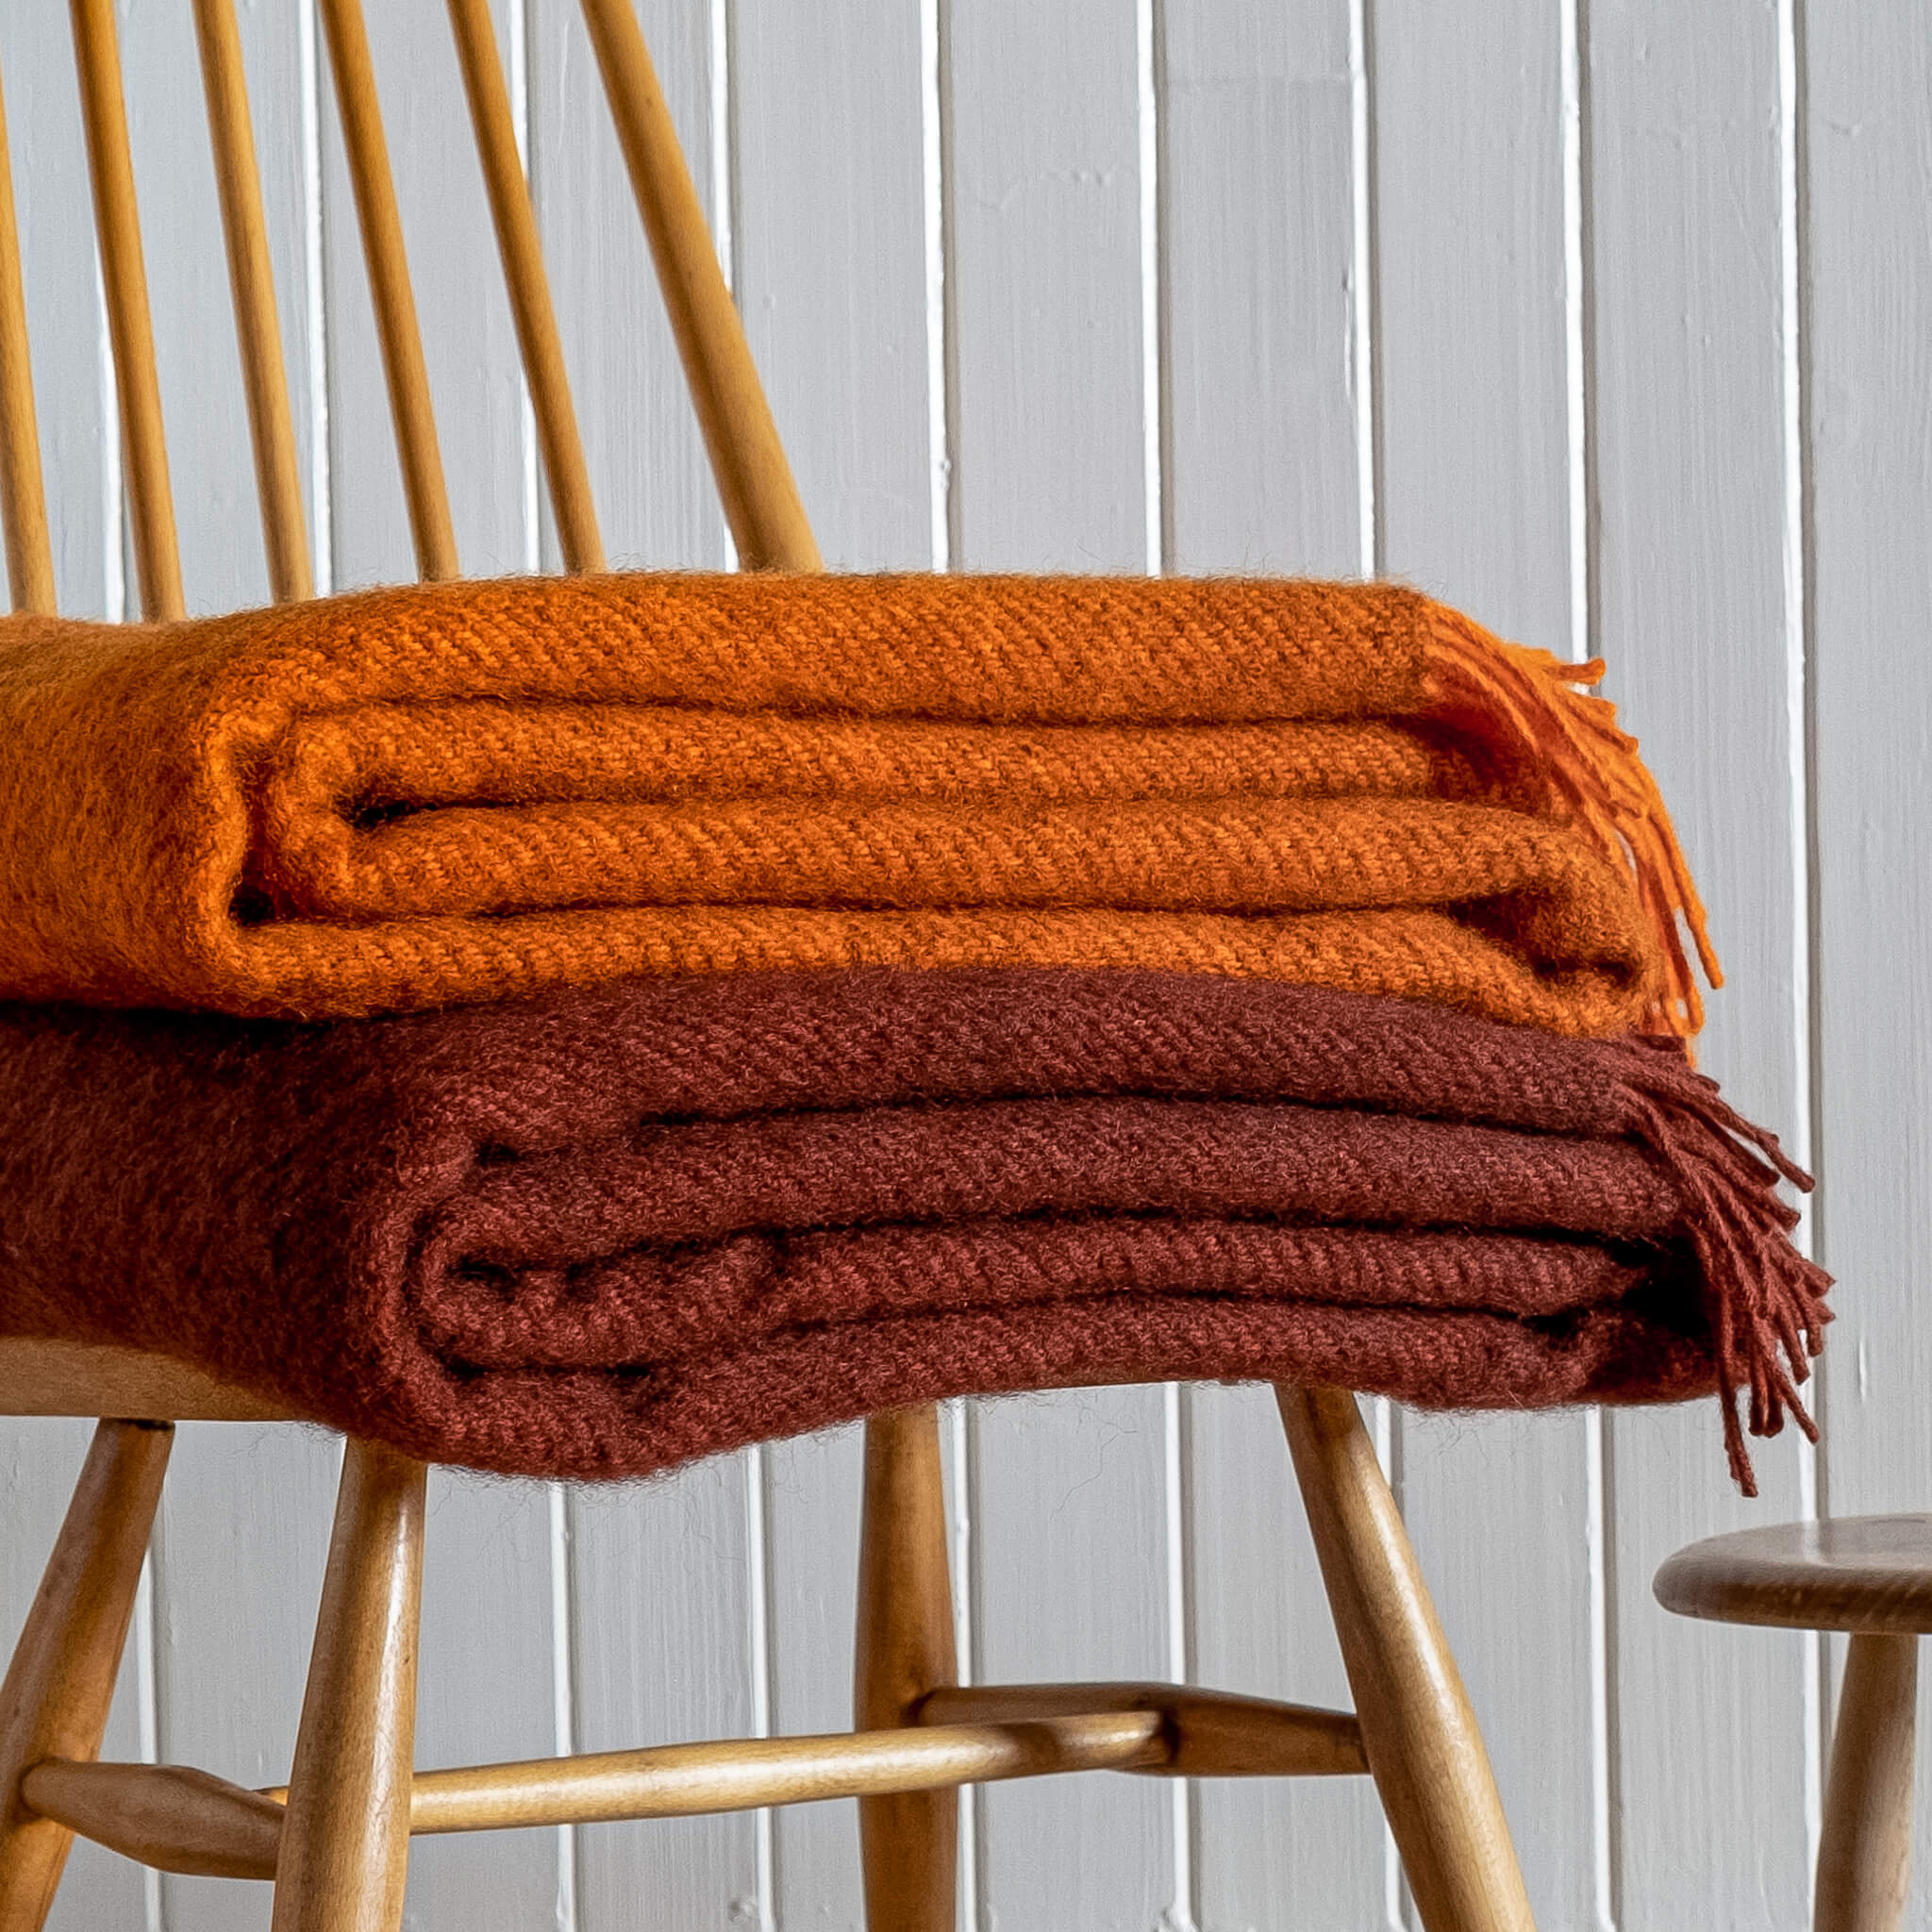 Close up of Gotland Wool Blanket – Rust & Orange folded on a chair